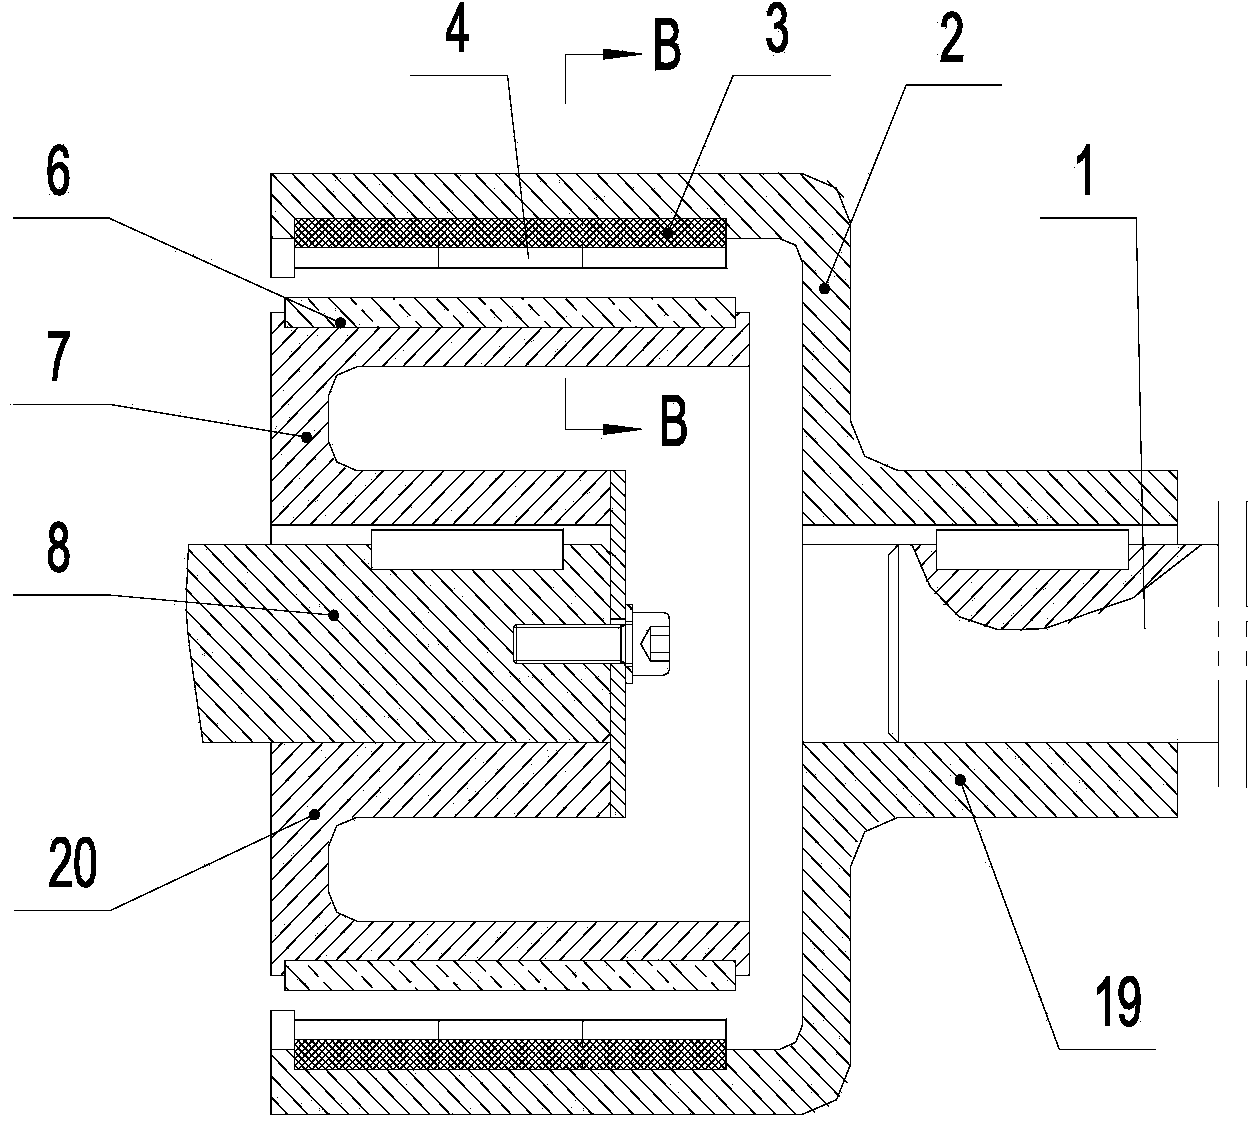 Sleeve magnetism-gathering magnetic circuit structure used for permanent magnetism eddy transmission apparatus